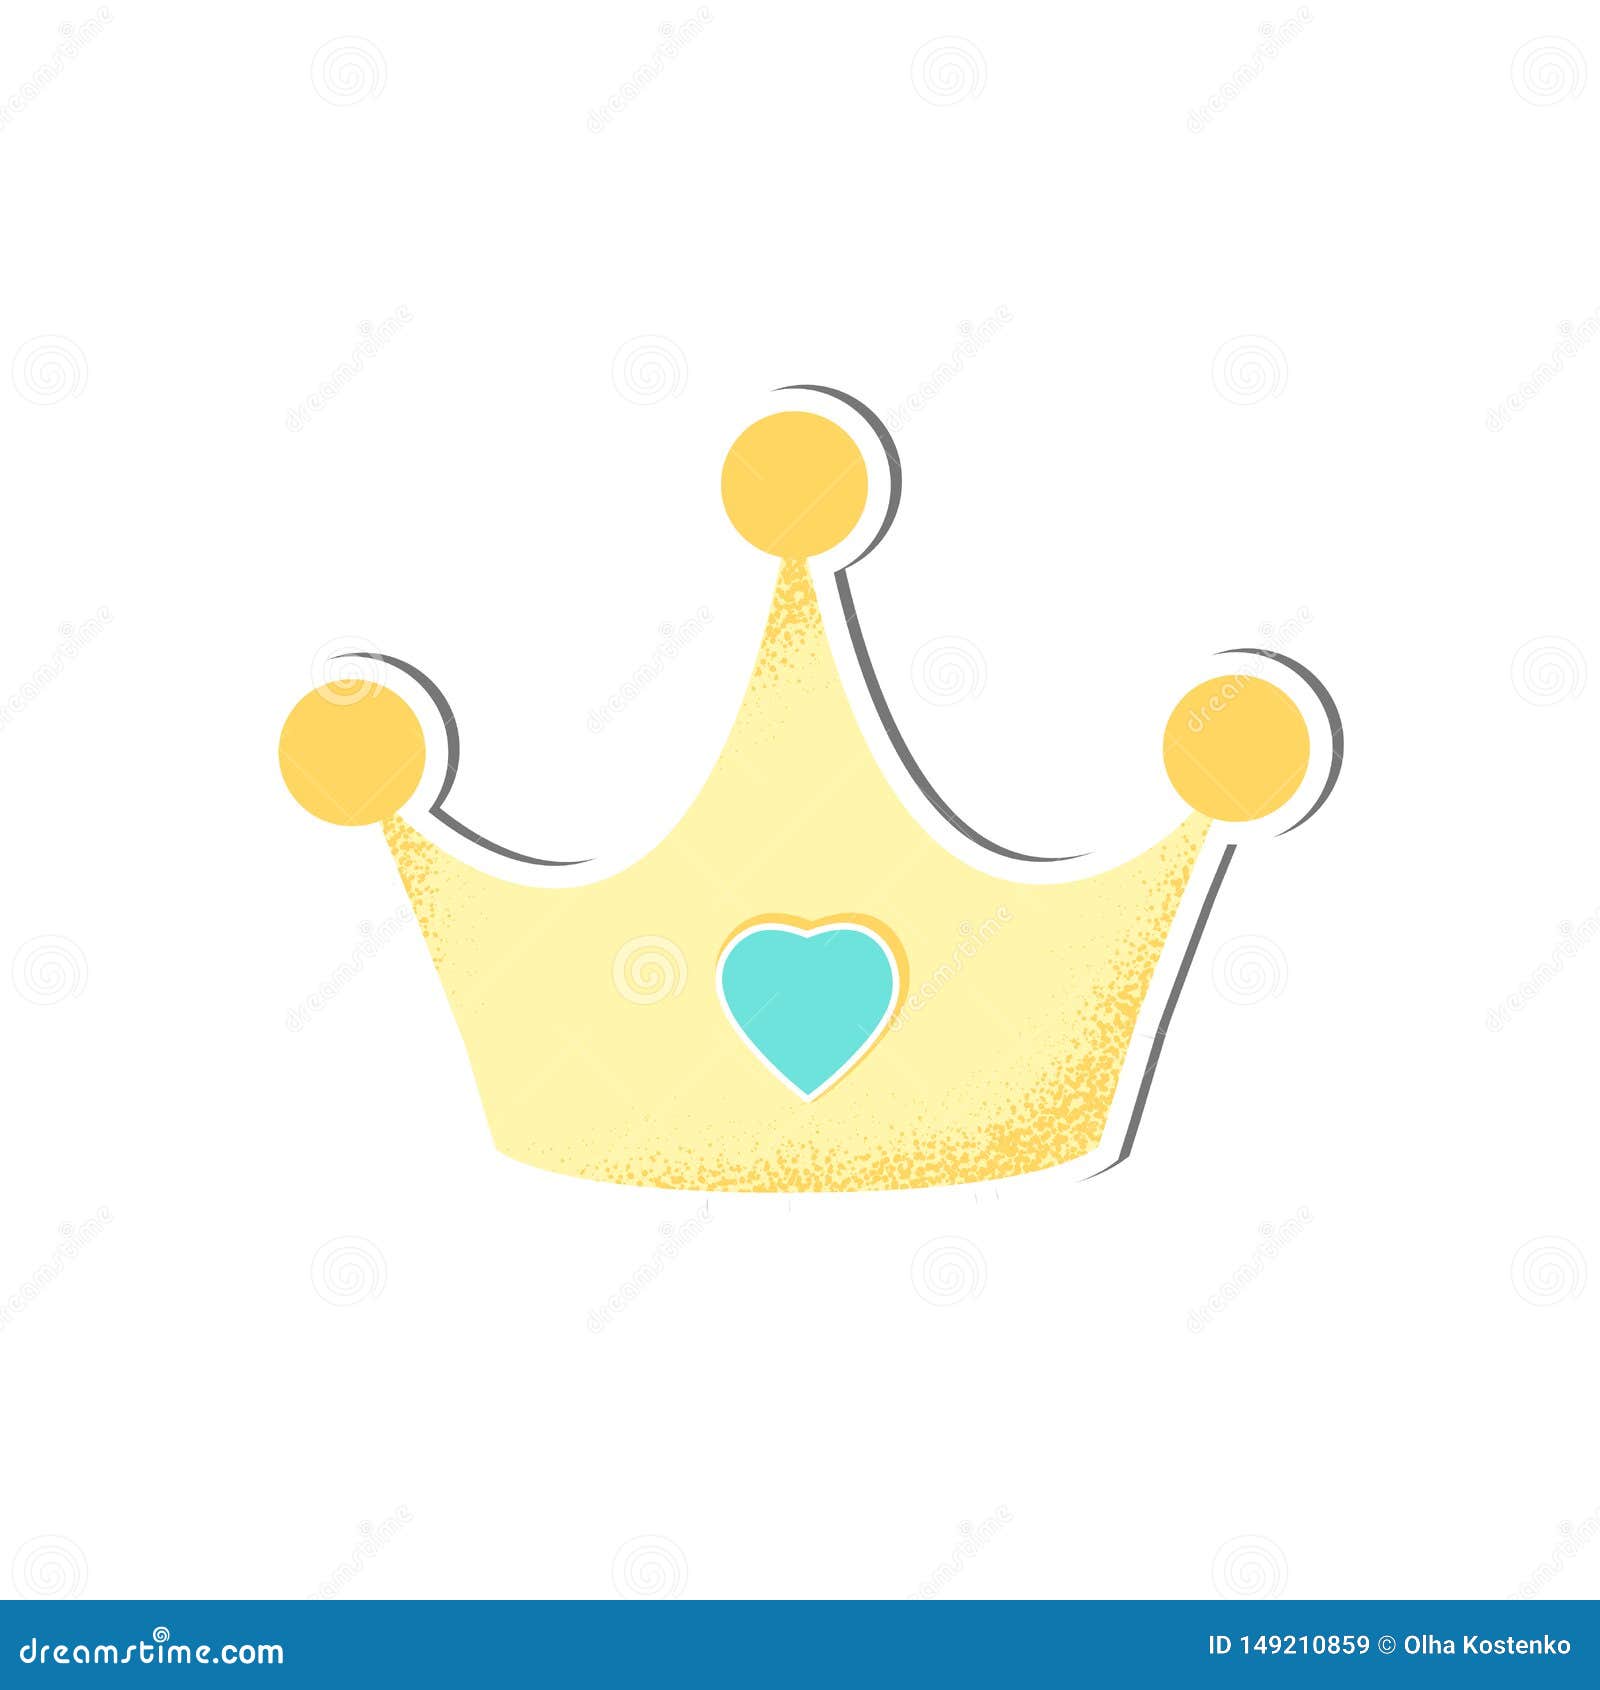 Download Baby Isolated Crown Vector For Boy Stock Vector ...